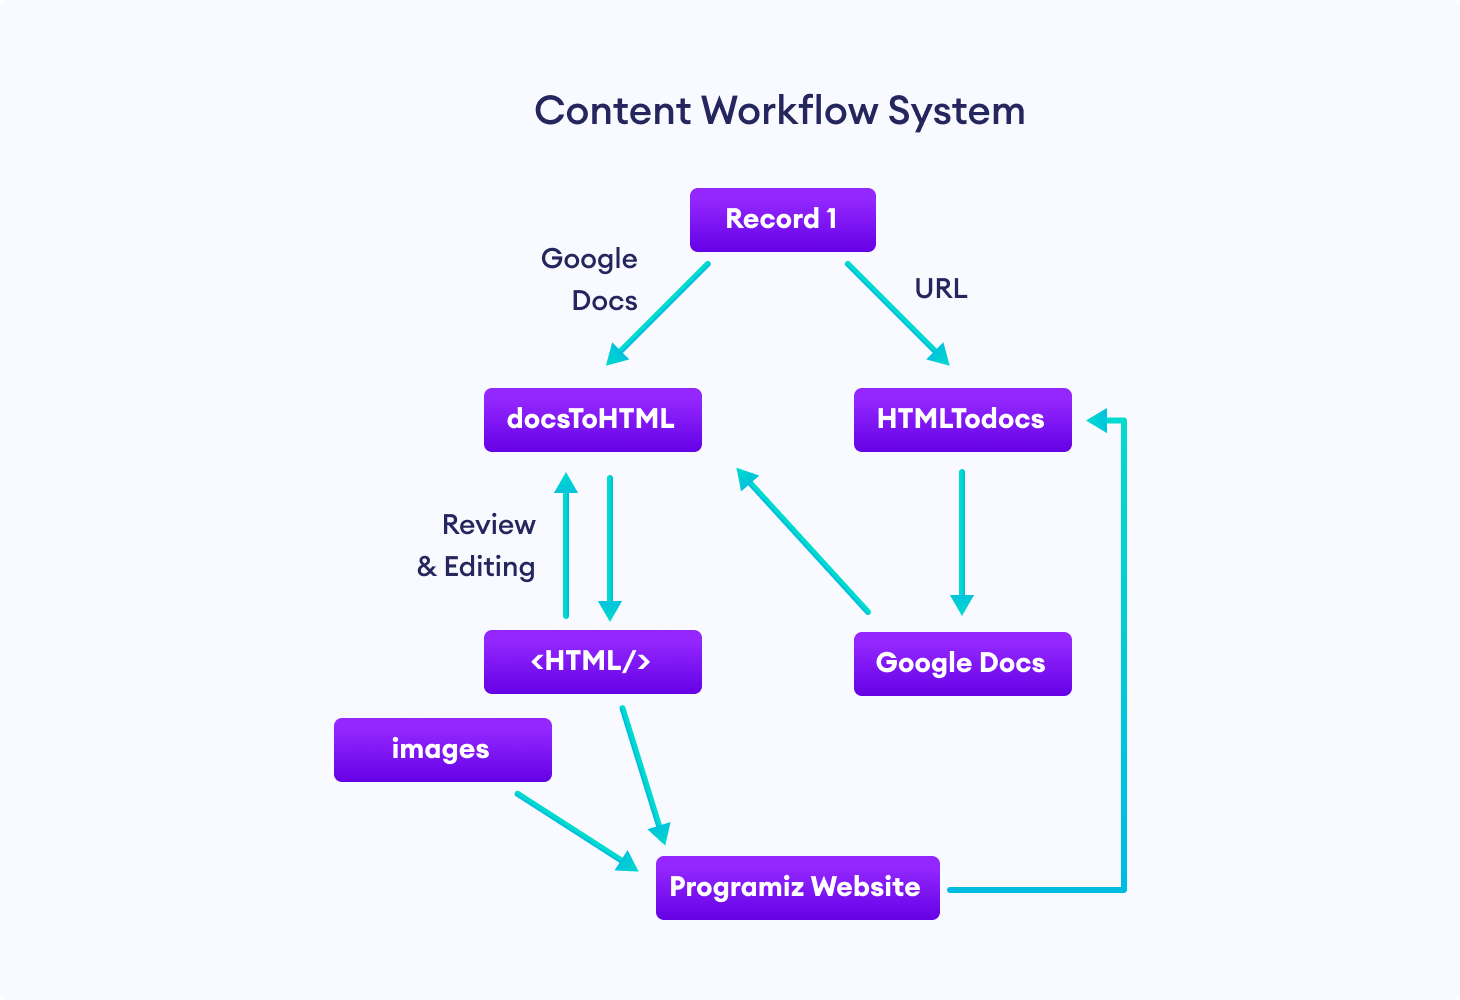 Working of the Content Workflow System